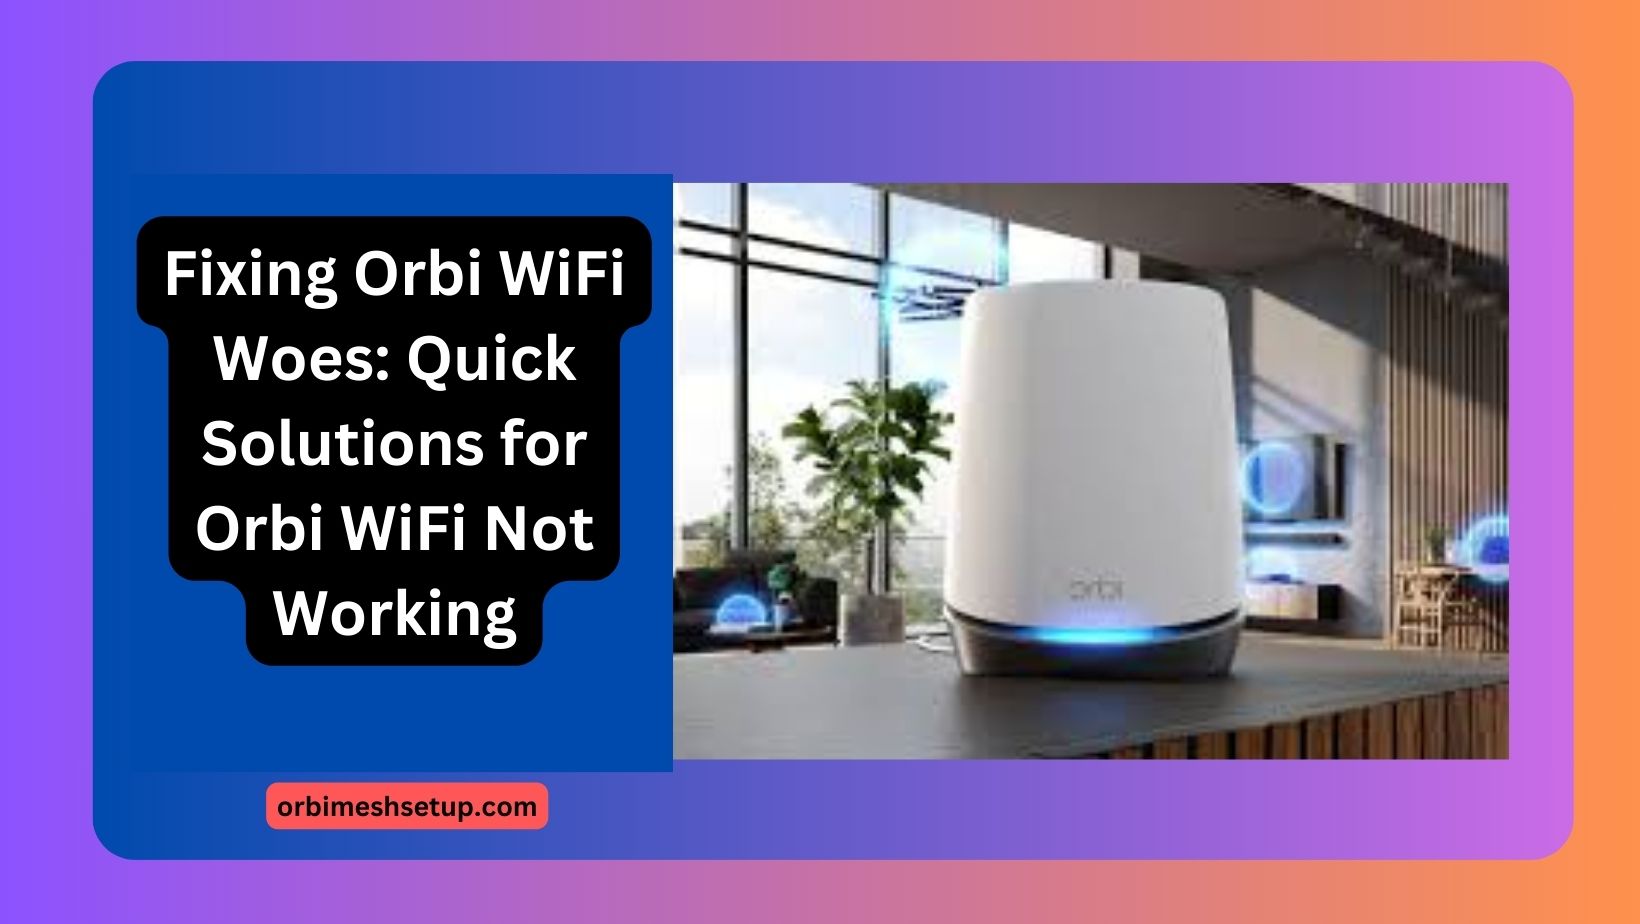 You are currently viewing Fixing Orbi WiFi Woes: Quick Solutions for Orbi WiFi Not Working